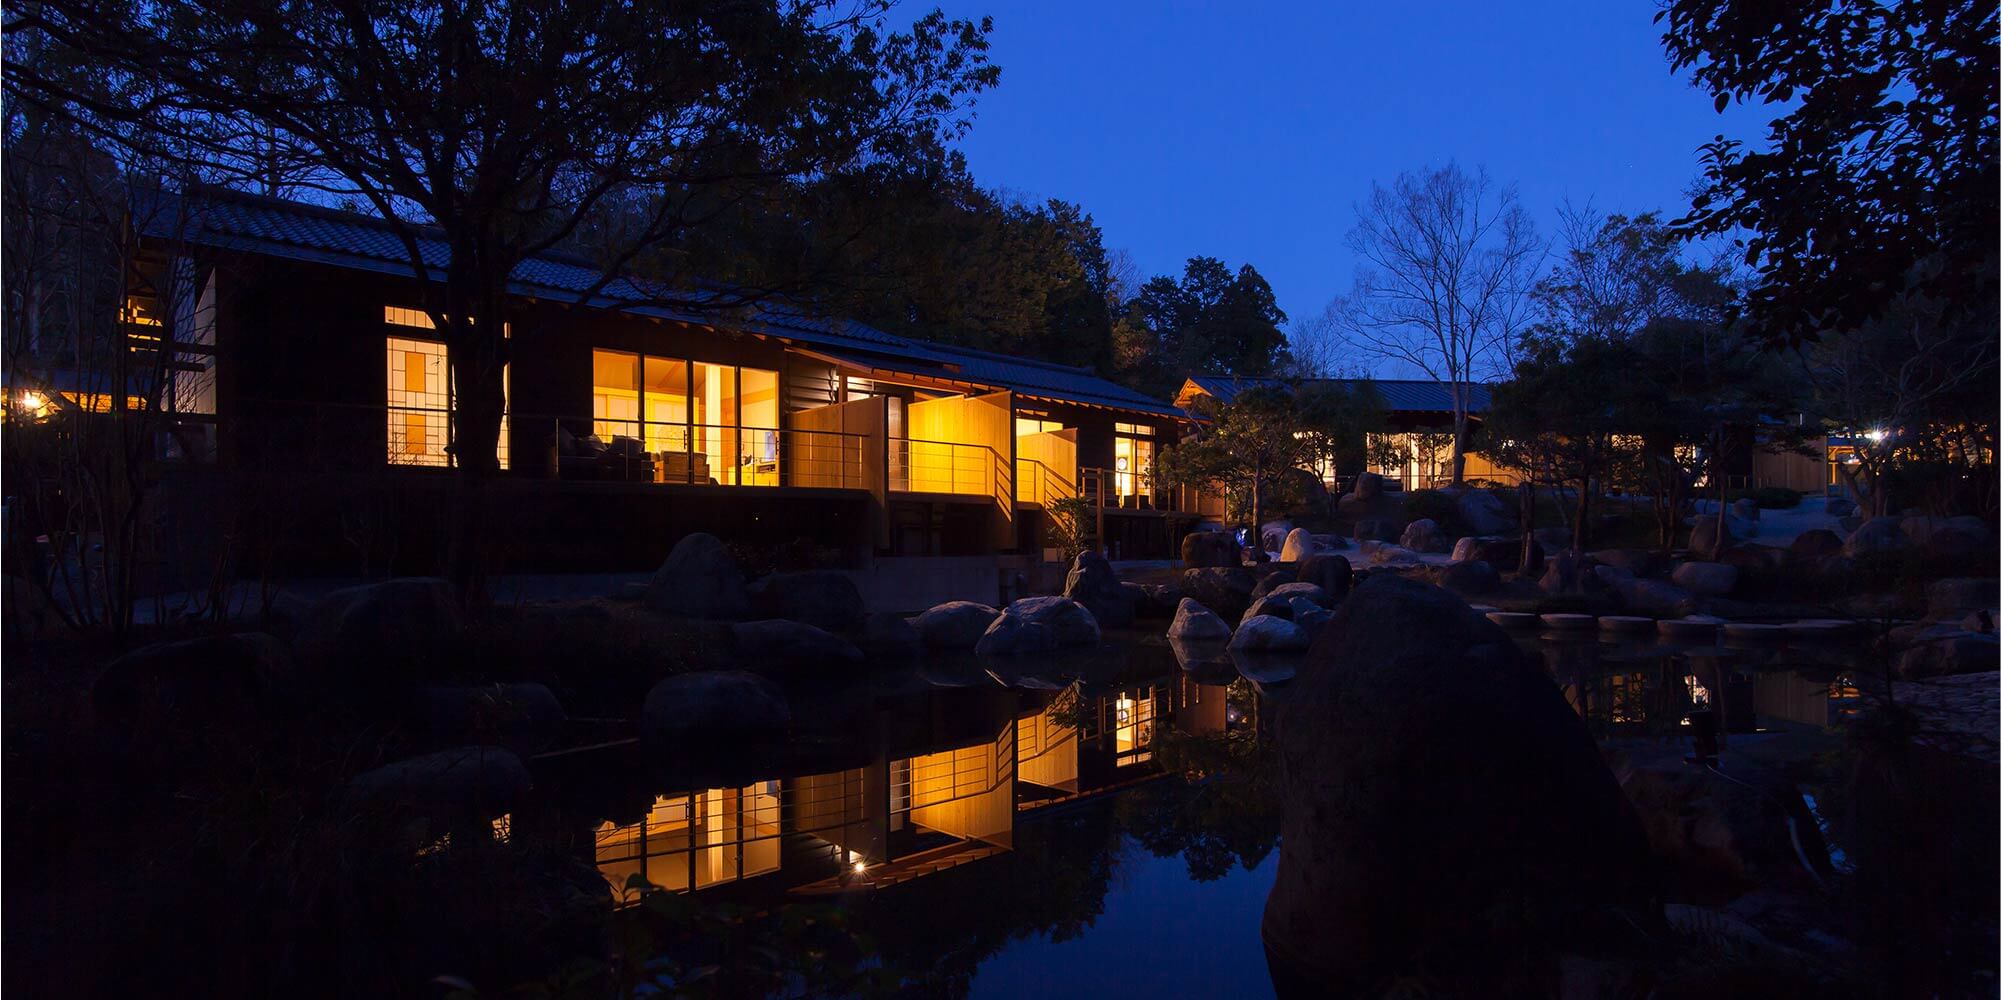 A resort offering peaceful moments nearby Ise Grand Shrine, far from hustles and bustles